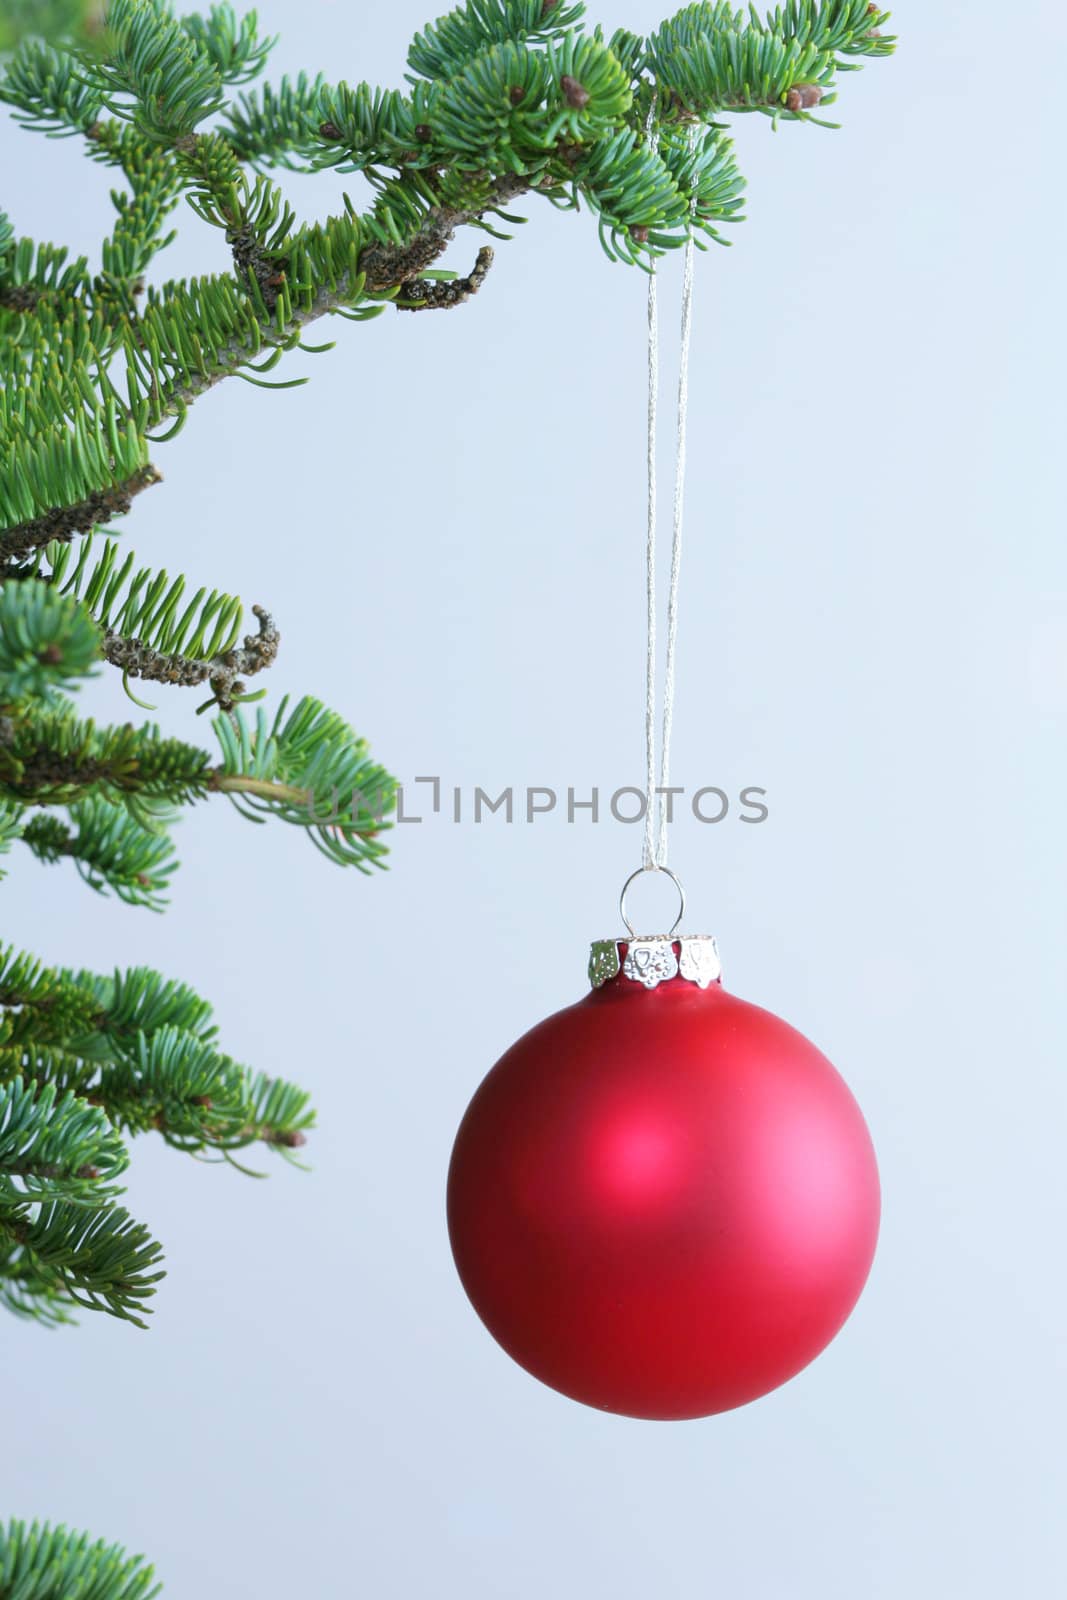 Red ornament hanging on Christmas tree. by jarenwicklund